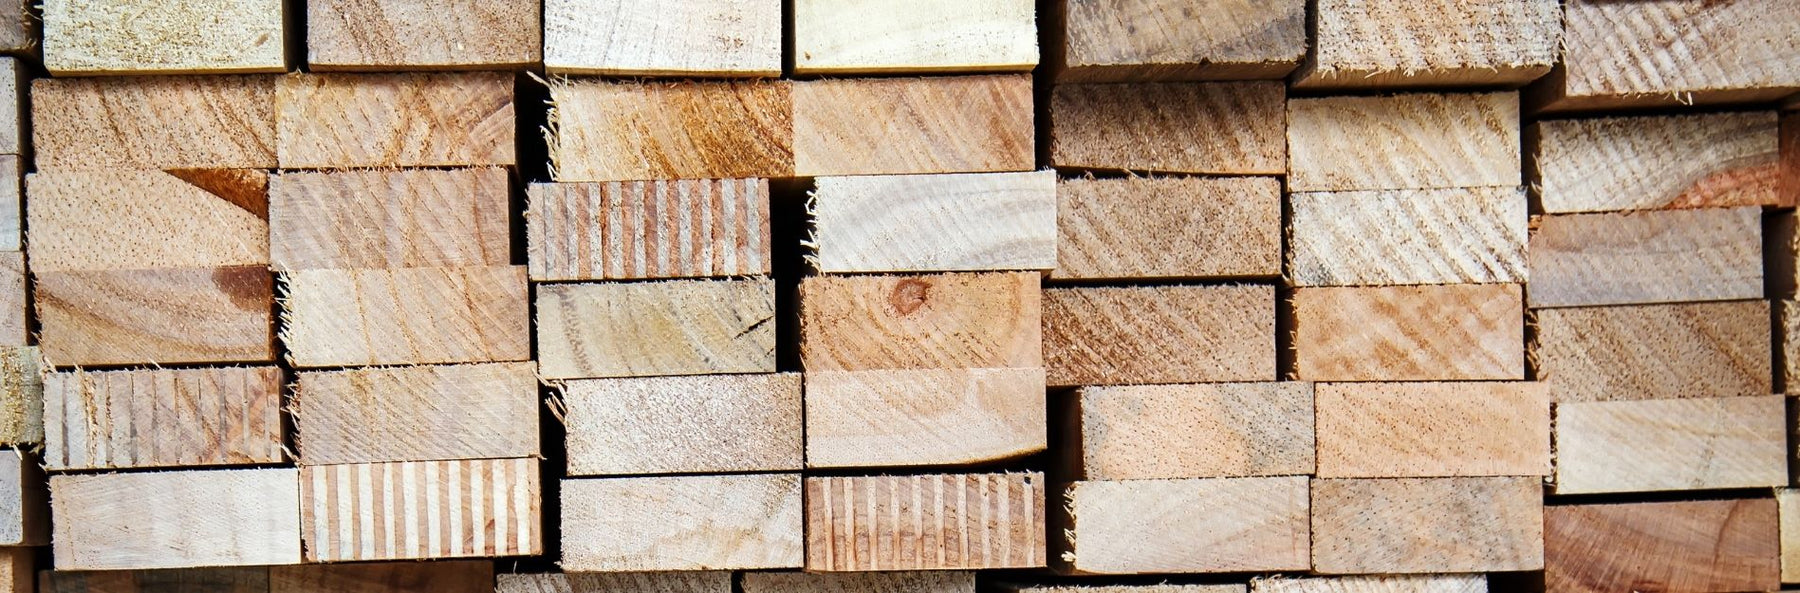 Hardwood Vs. Softwood: Differences and Uses